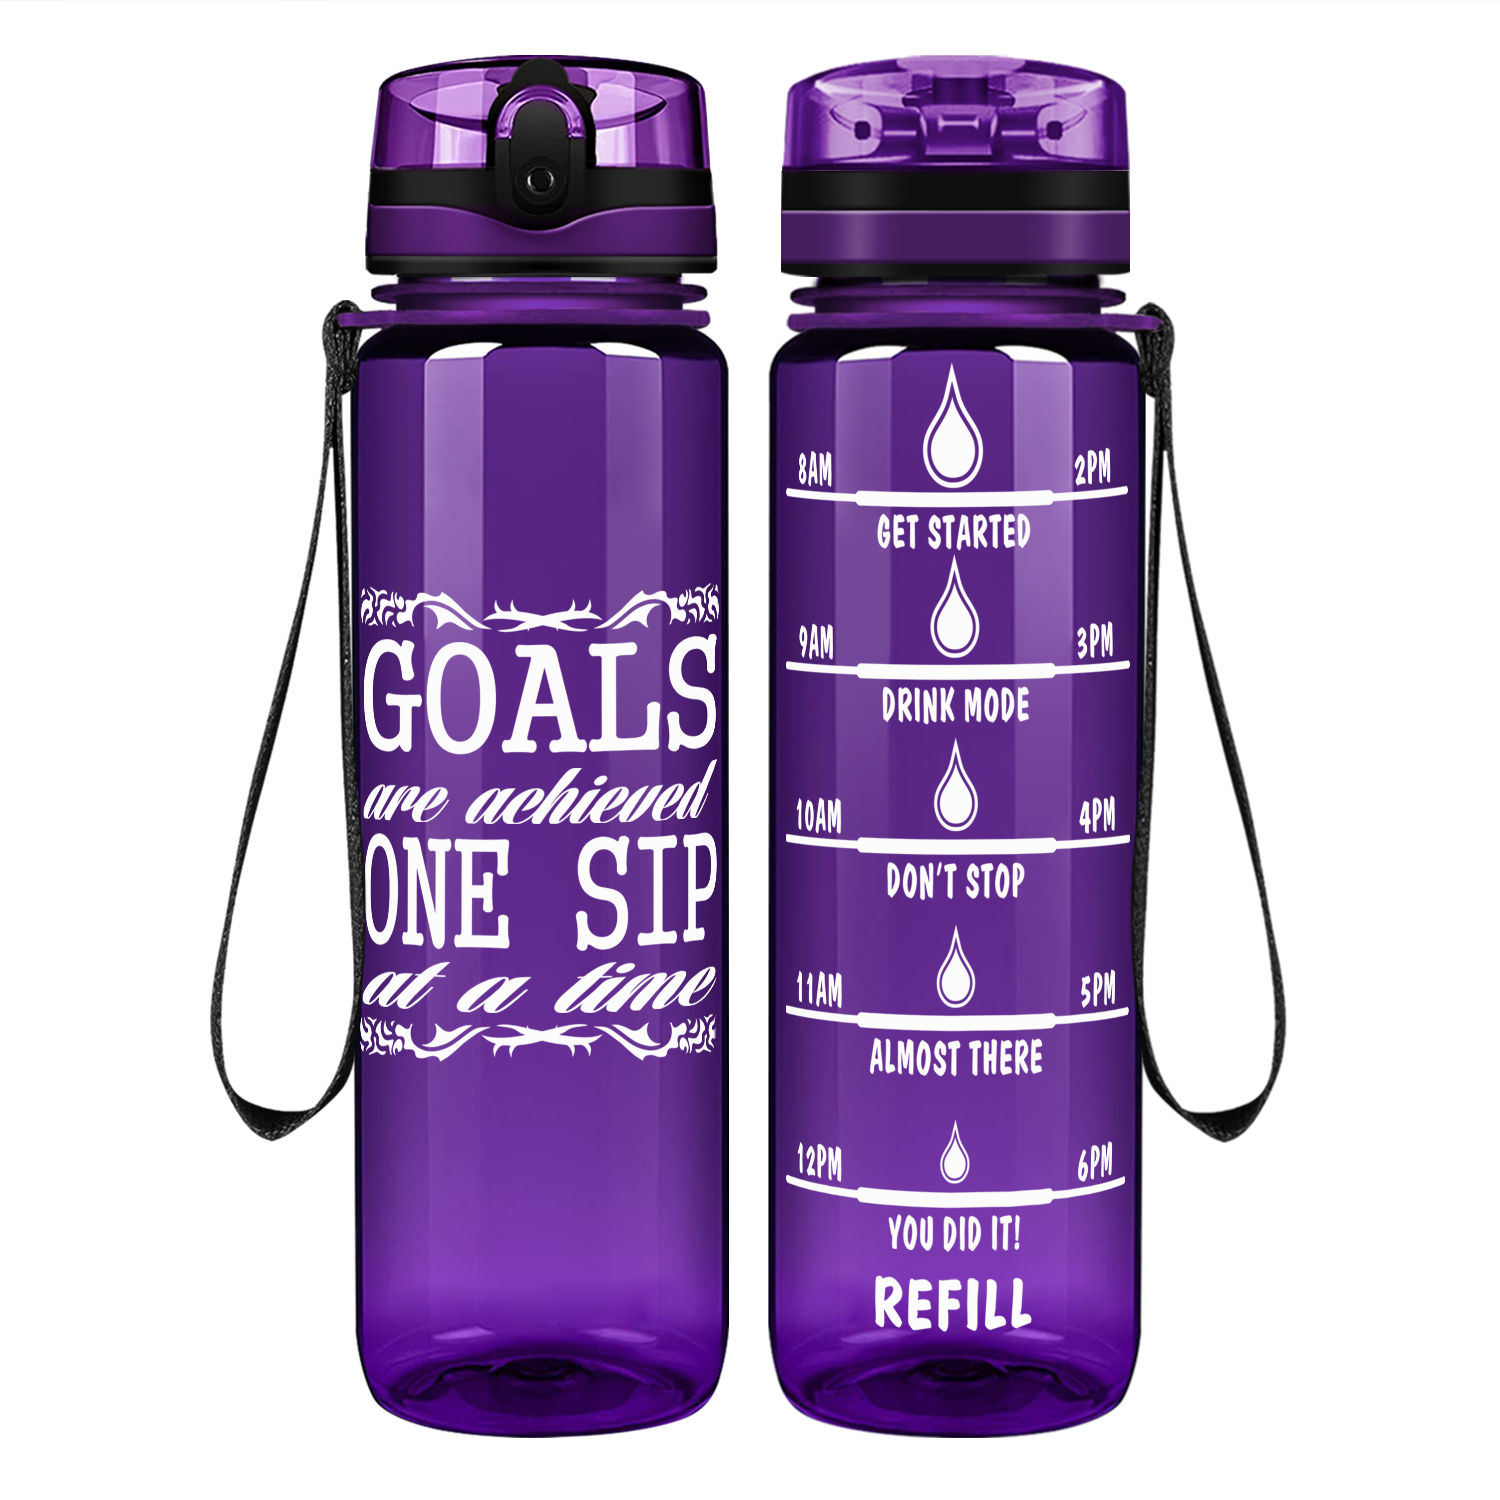 One Sip At A Time Goals on 32 oz Motivational Tracking Water Bottle